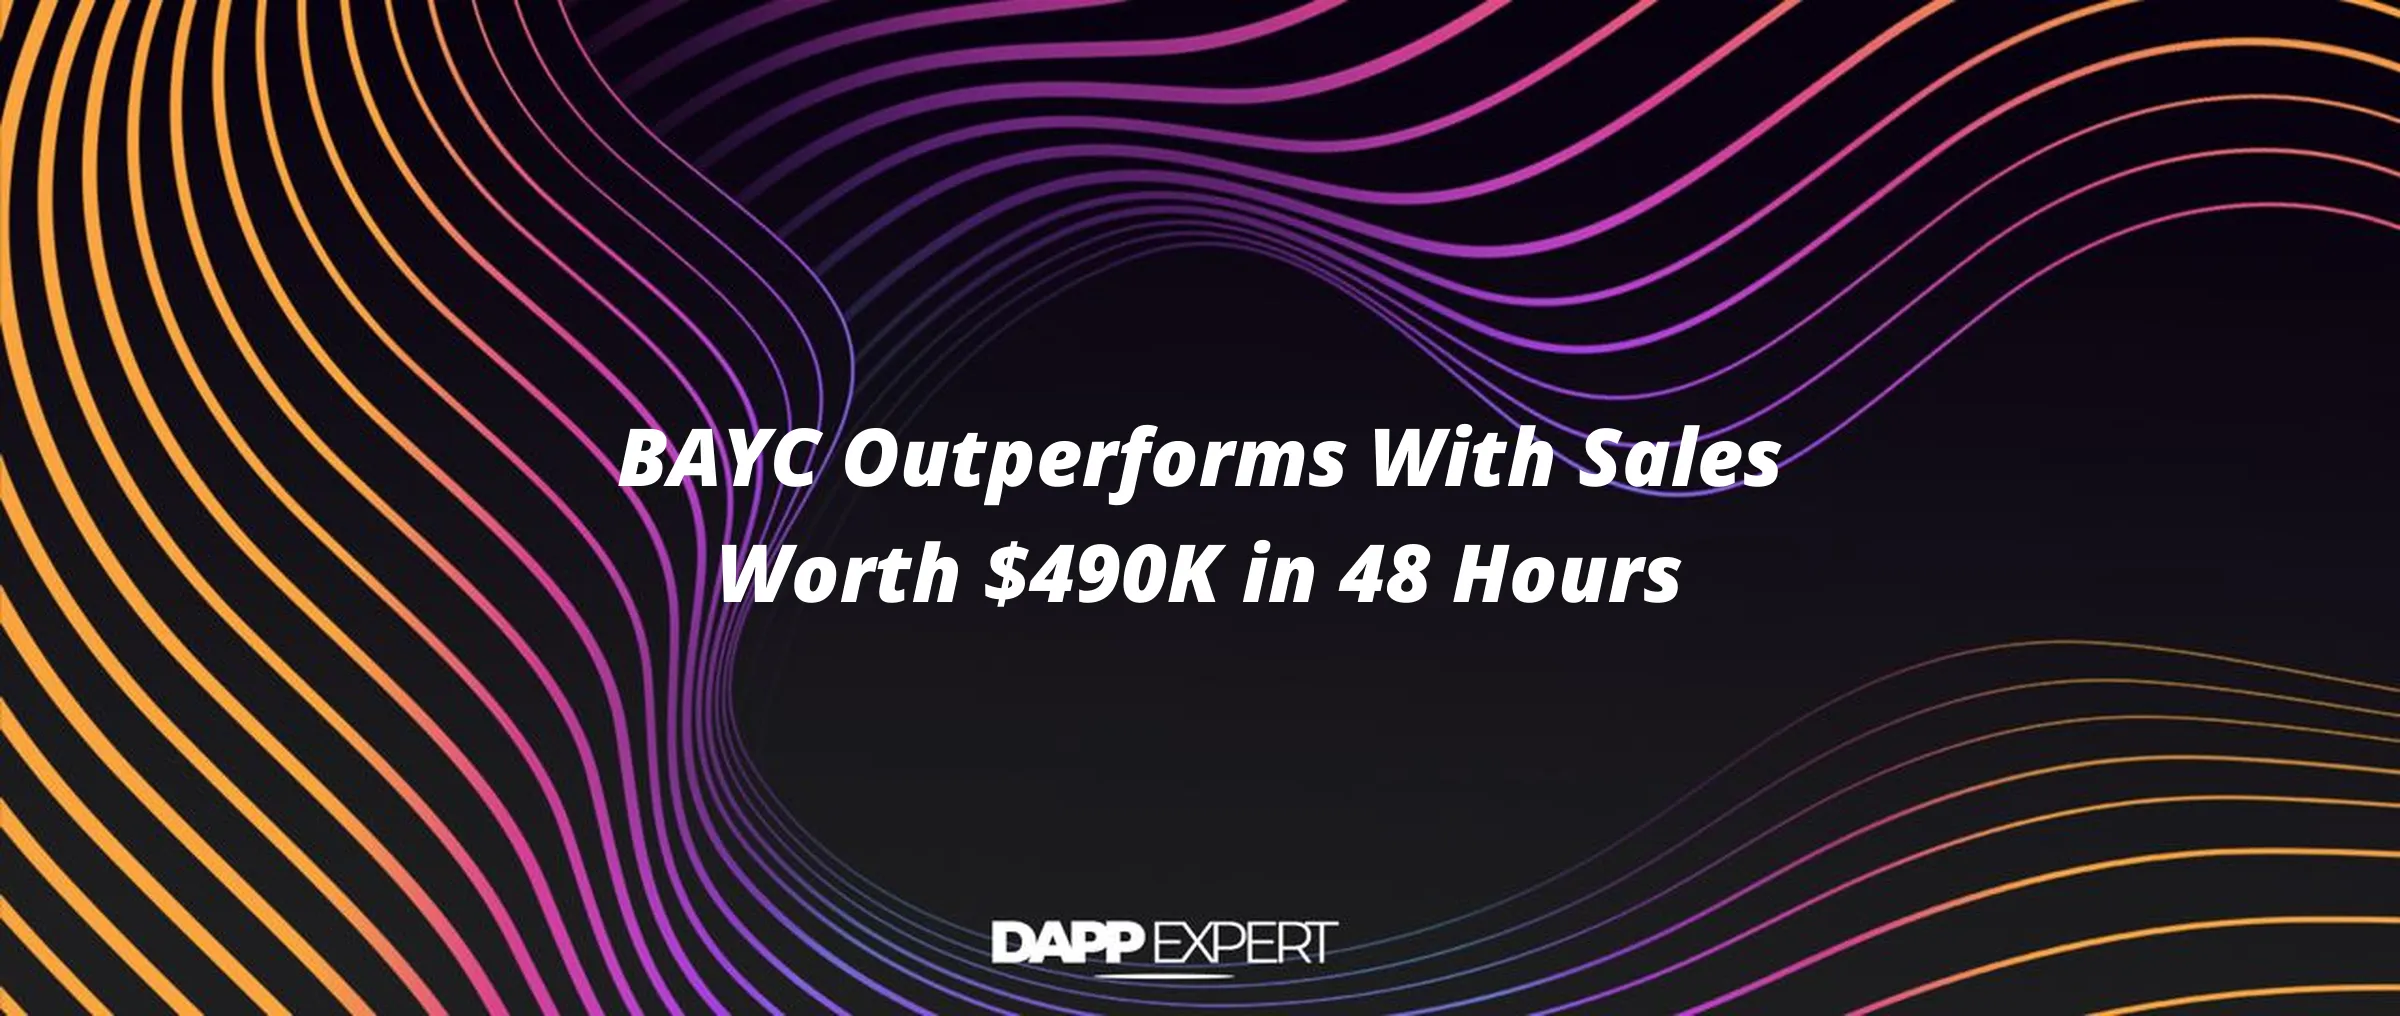 BAYC Outperforms With Sales Worth $490K in 48 Hours